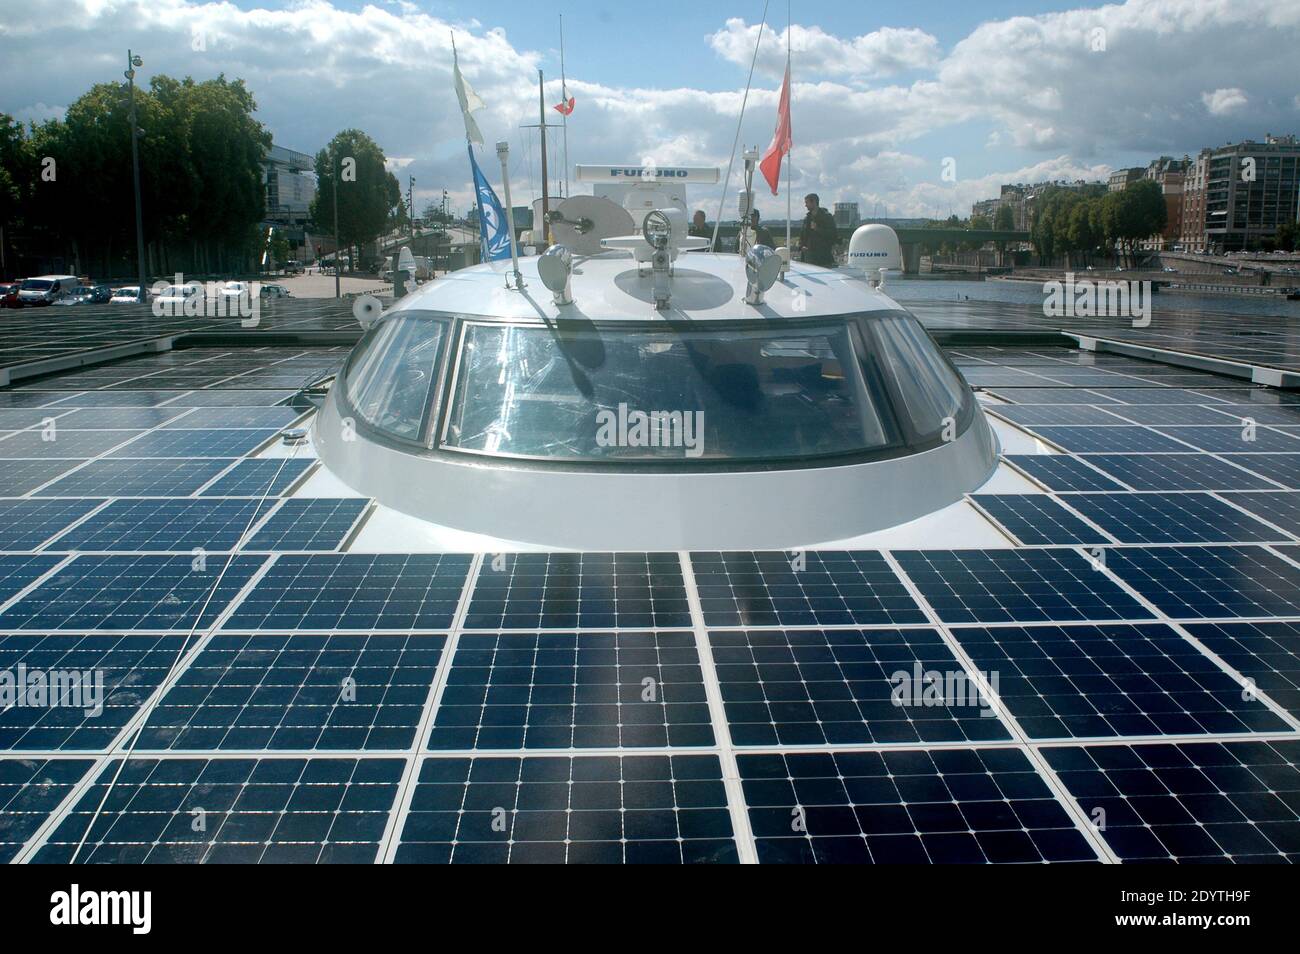 The world's largest solar-powered boat, in Paris, France by the Seine river on September 10, 2013. The catamaran powered exclusively by solar energy, completed the first solar-powered trip around the world on May 4, 2012 after travelling over 60,000 km (37,282 miles) in 584 days. Socialist candidate for the municipal election in Paris, Anne Hidalgo was on board. Photo by Alain Apaydin/ABACAPRESS.COM Stock Photo